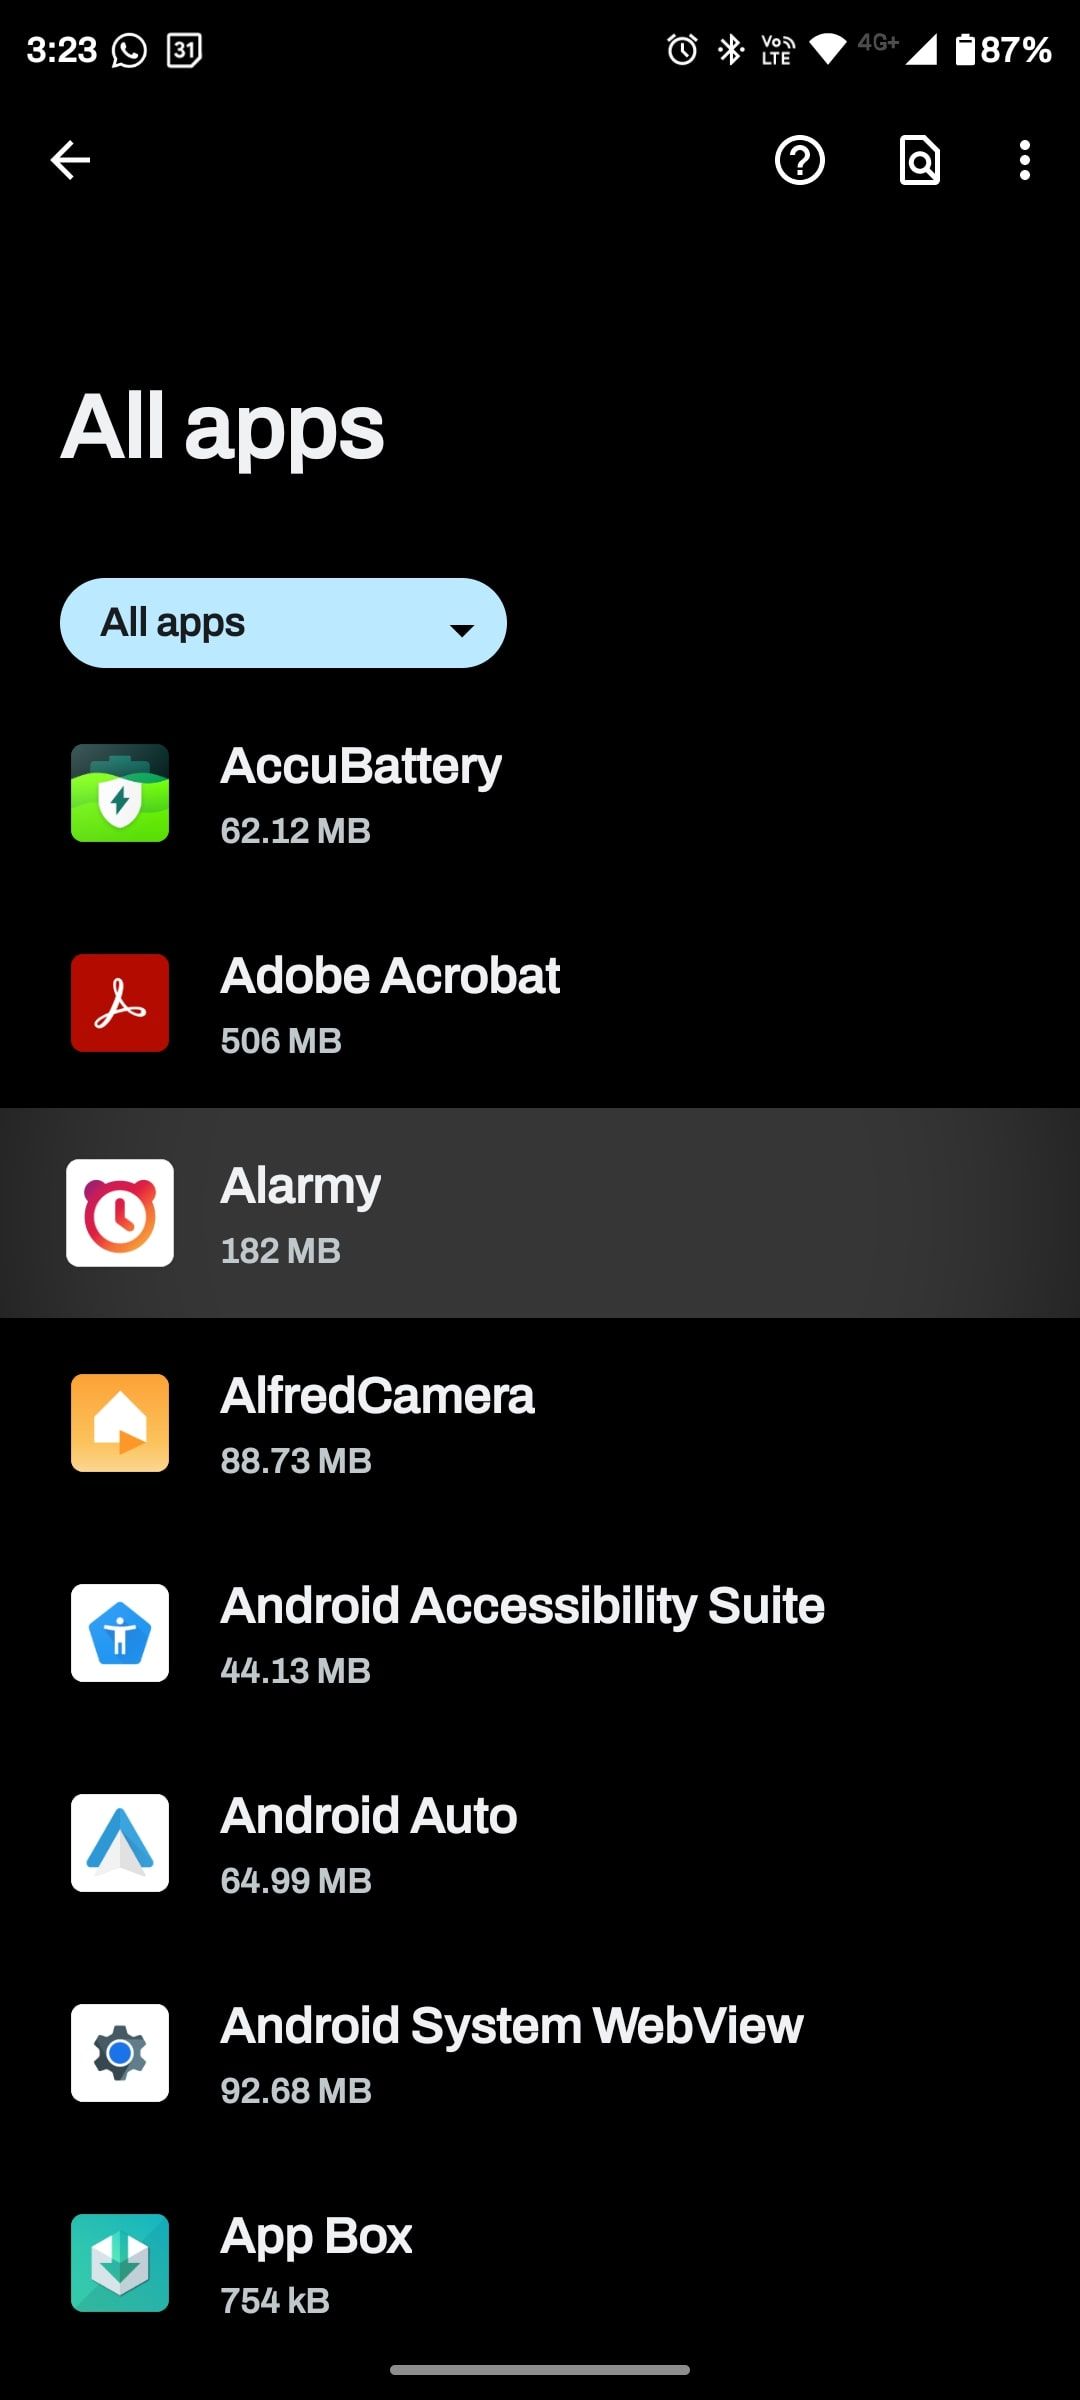 All apps list with Alarmy highlighted